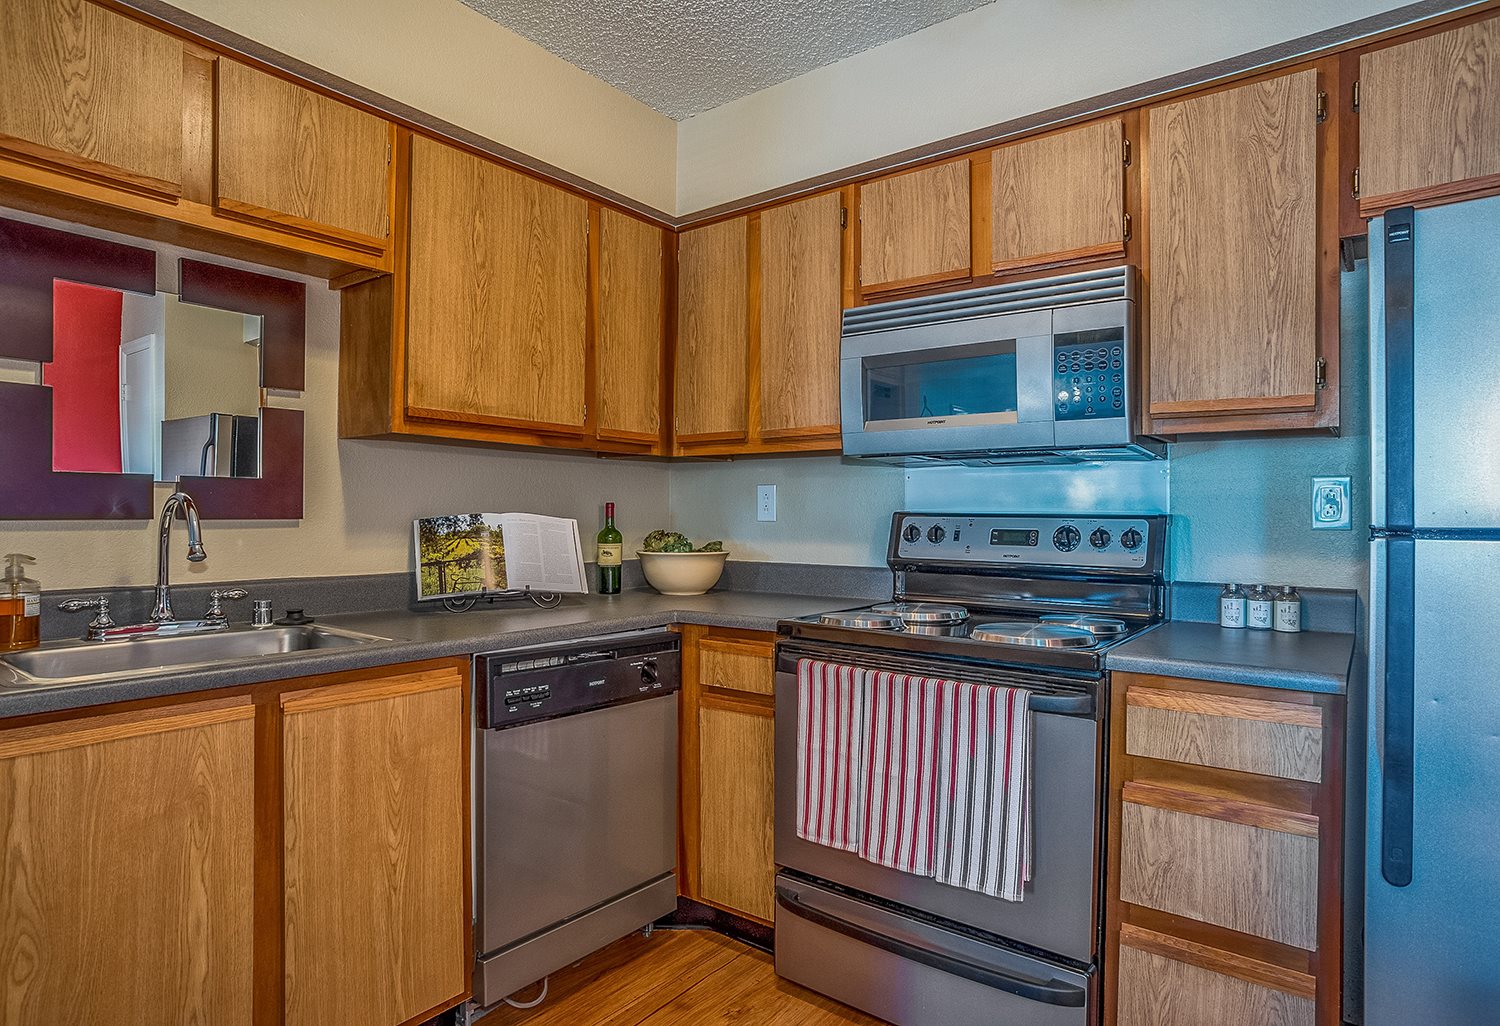 Greeley, Colorado, ,Apartment,Furnished,50th Ave,1036